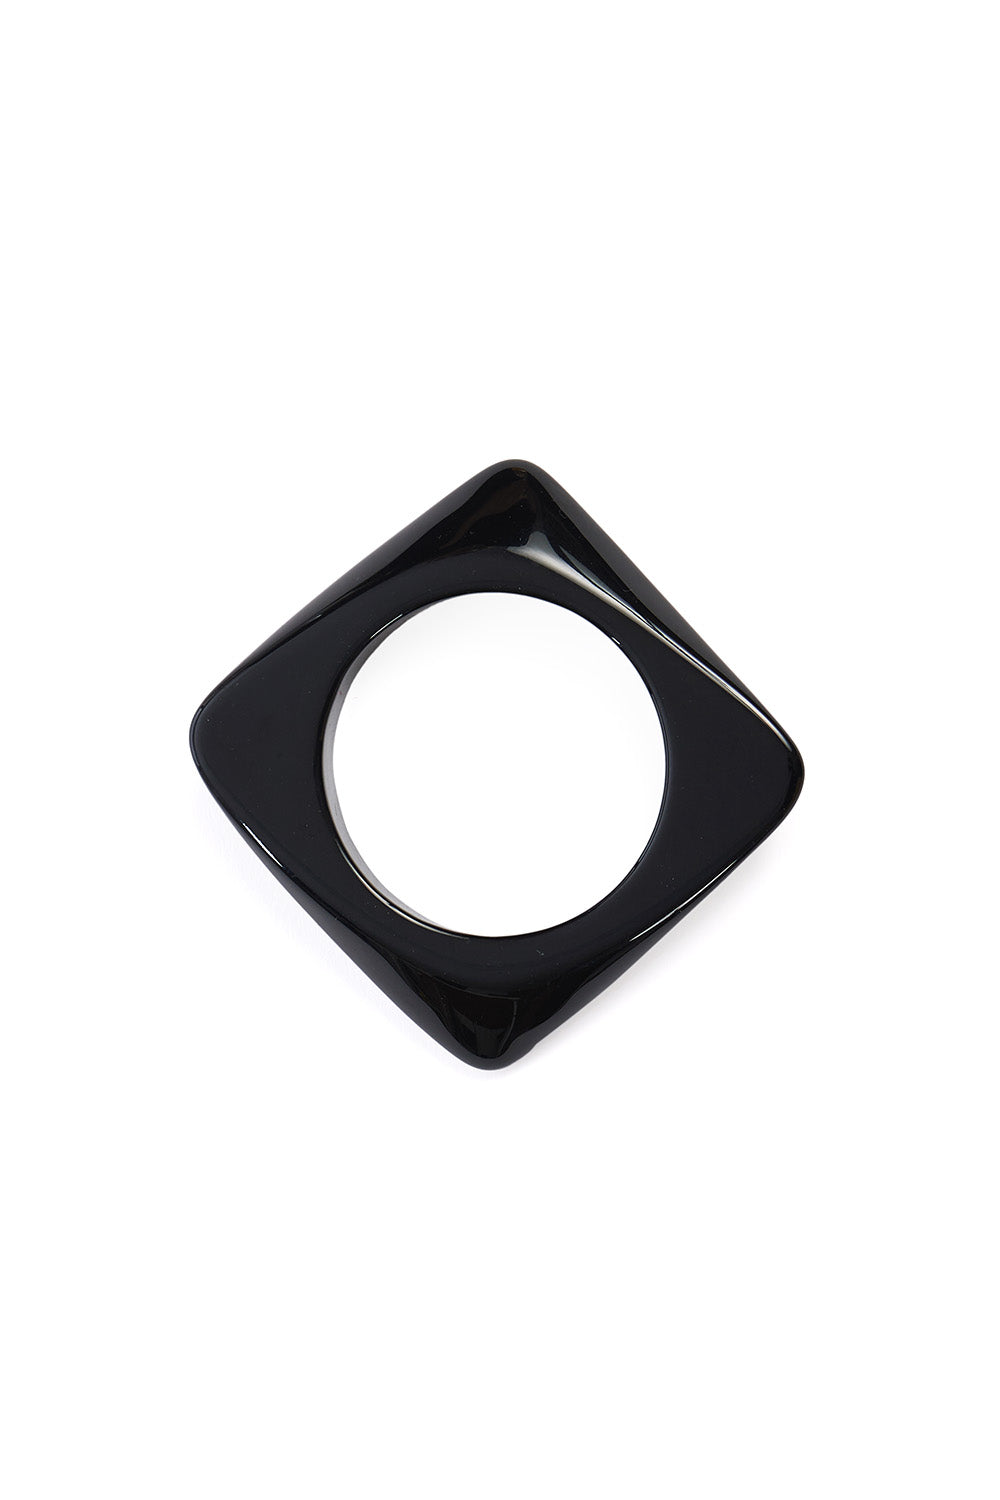 Square shiny resin bangle in black with warped angular detail at each corner